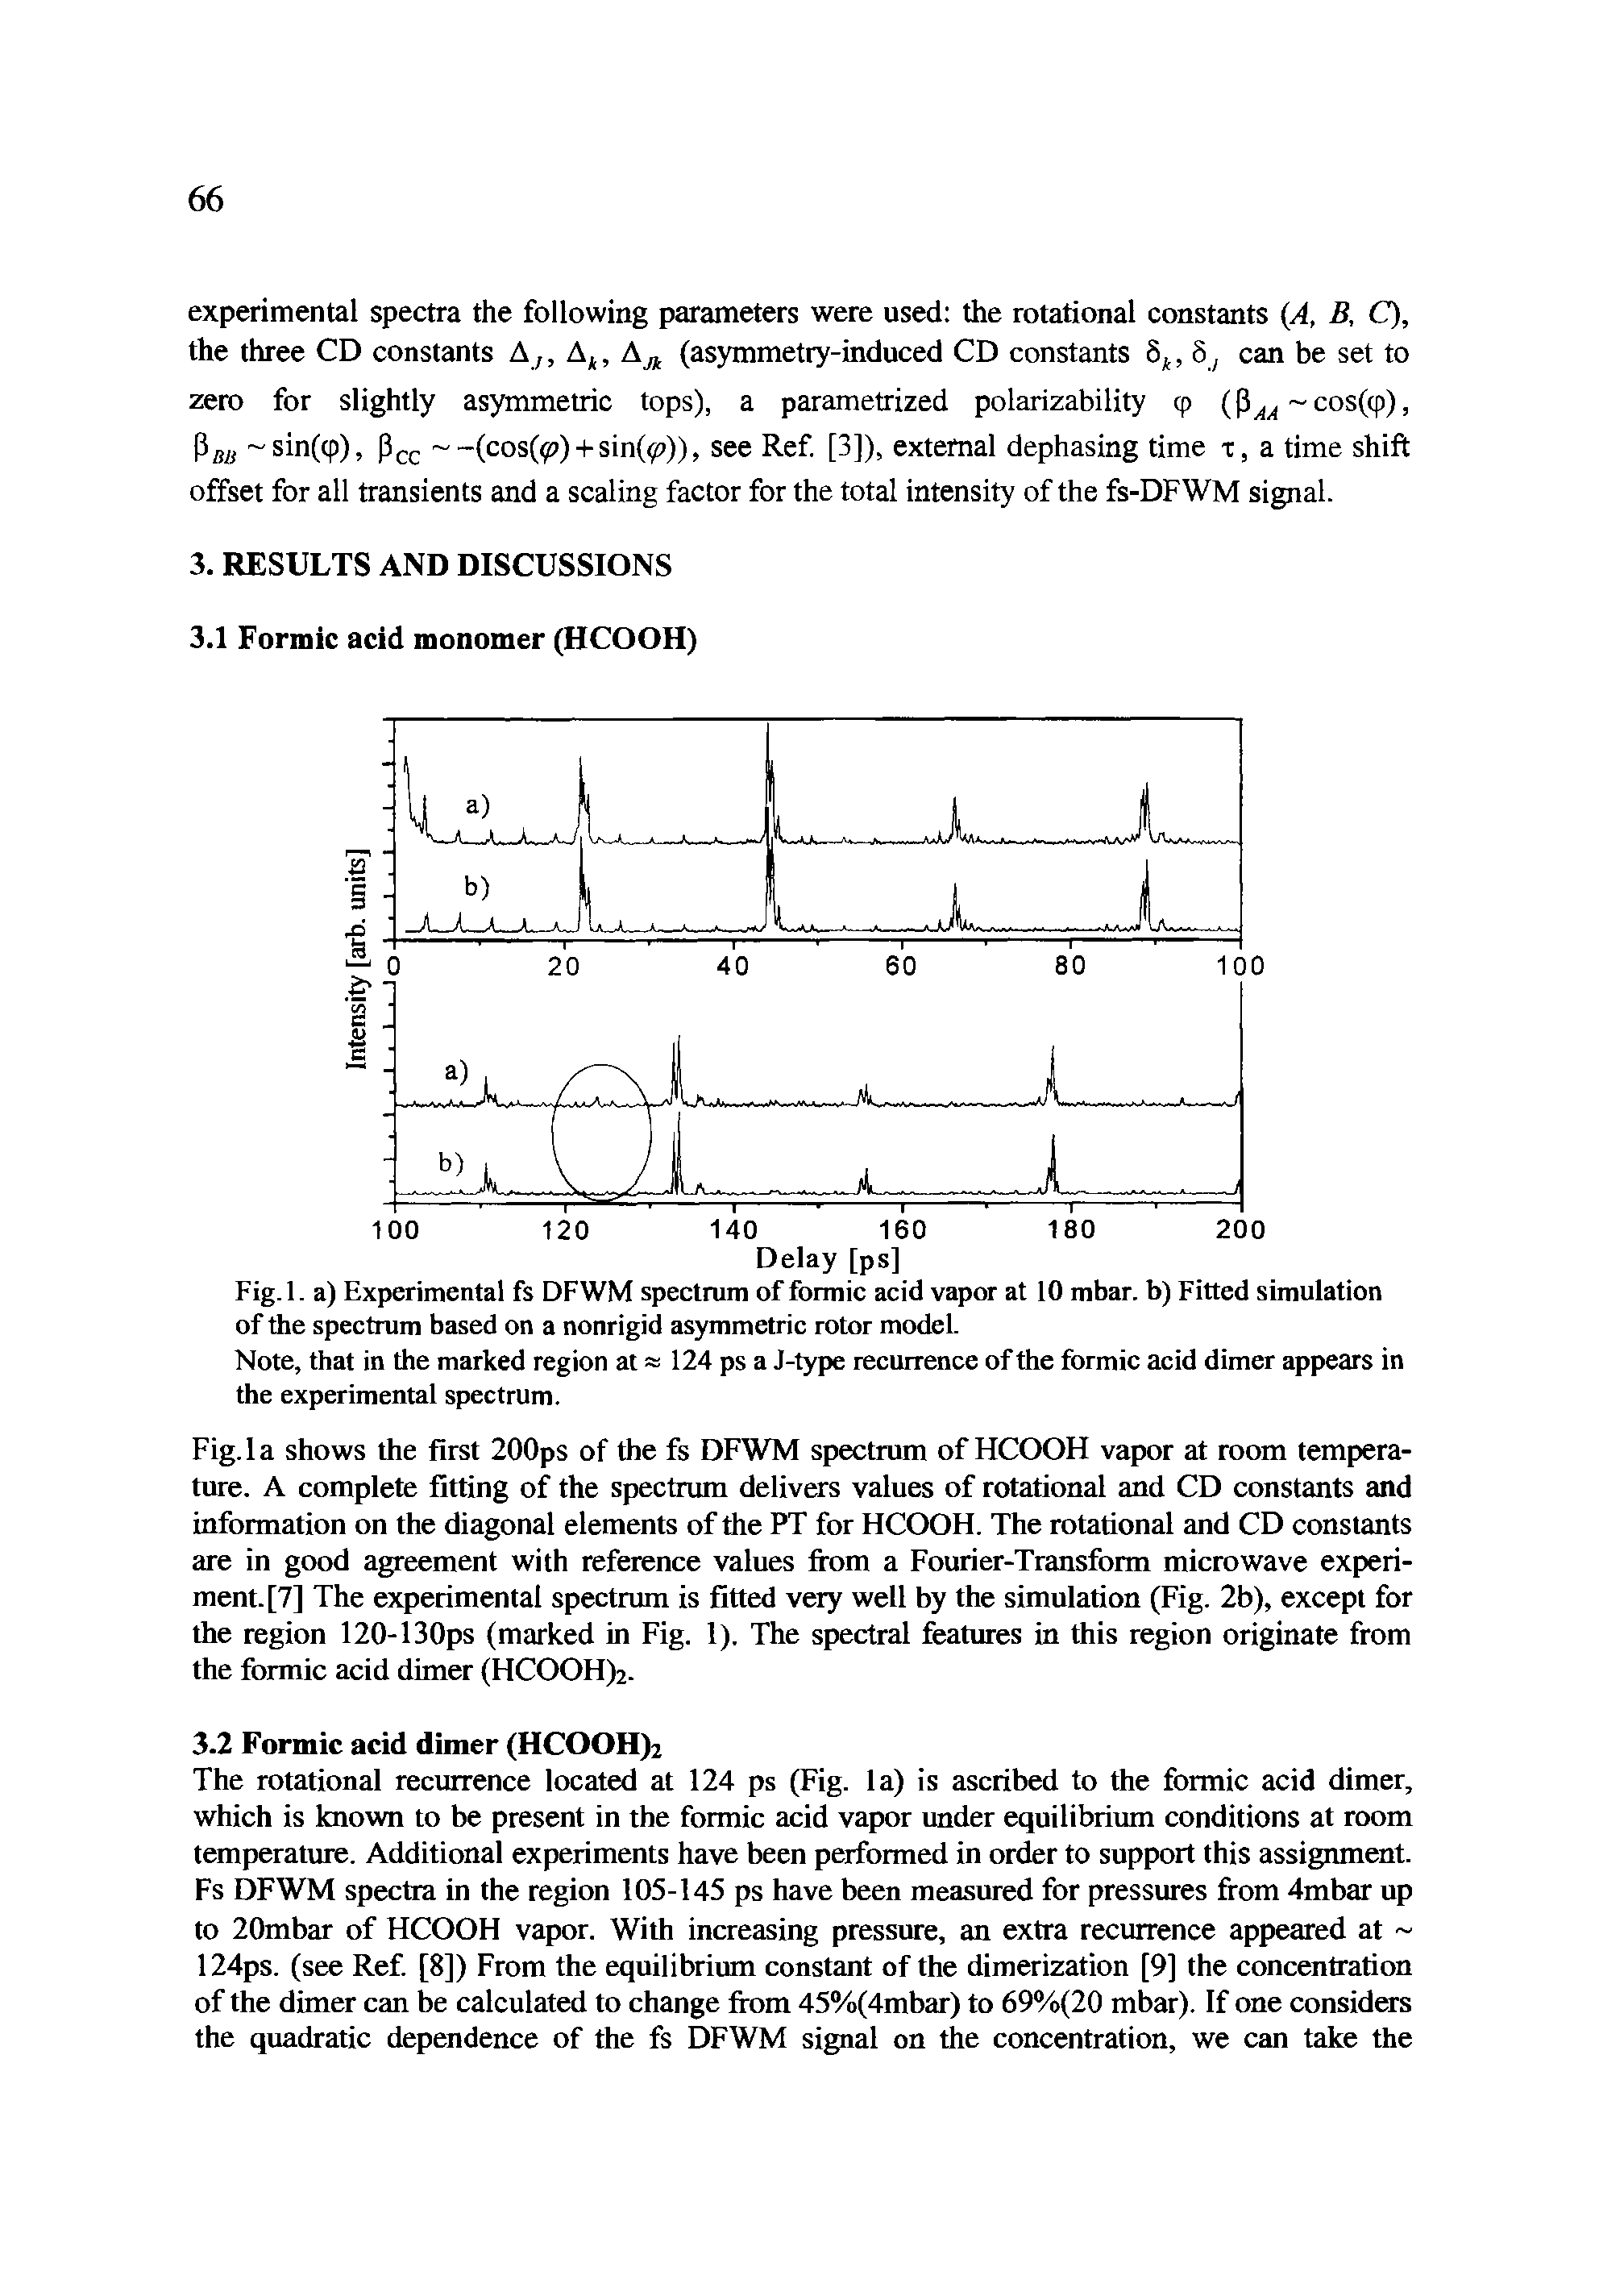 Fig.la shows the first 200ps of the fs DFWM spectrum of HCOOH vapor at room temperature. A complete fitting of the spectrum delivers values of rotational and CD constants and information on the diagonal elements of the PT for HCOOH. The rotational and CD constants are in good agreement with reference values from a Fourier-Transform microwave experiment. [7] The experimental spectrum is fitted very well by the simulation (Fig. 2b), except for the region 120-130ps (marked in Fig. 1). The spectral features in this region originate from the formic acid dimer (HCOOHh-...